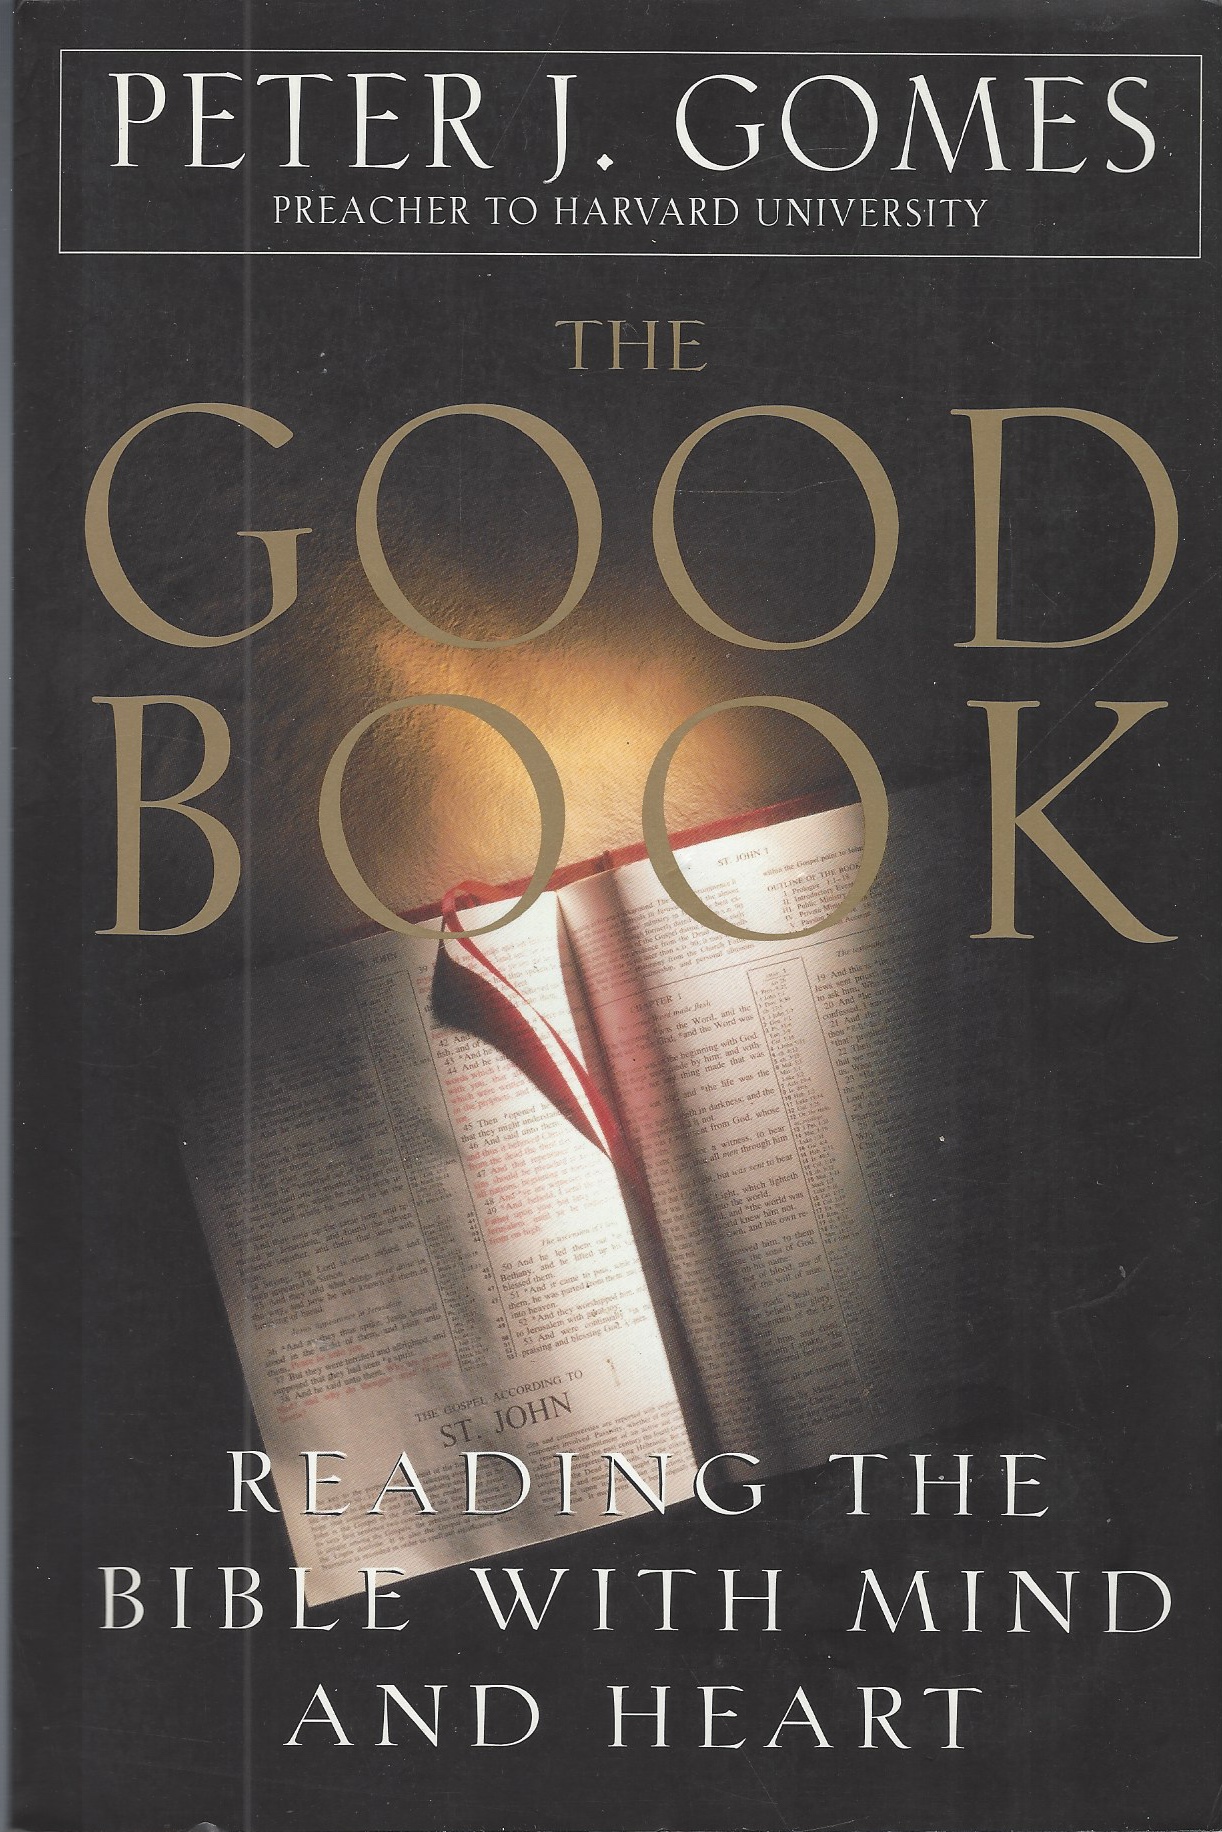 GOMES PETER J. - Good Book: Reading the Bible with Mind and Heart